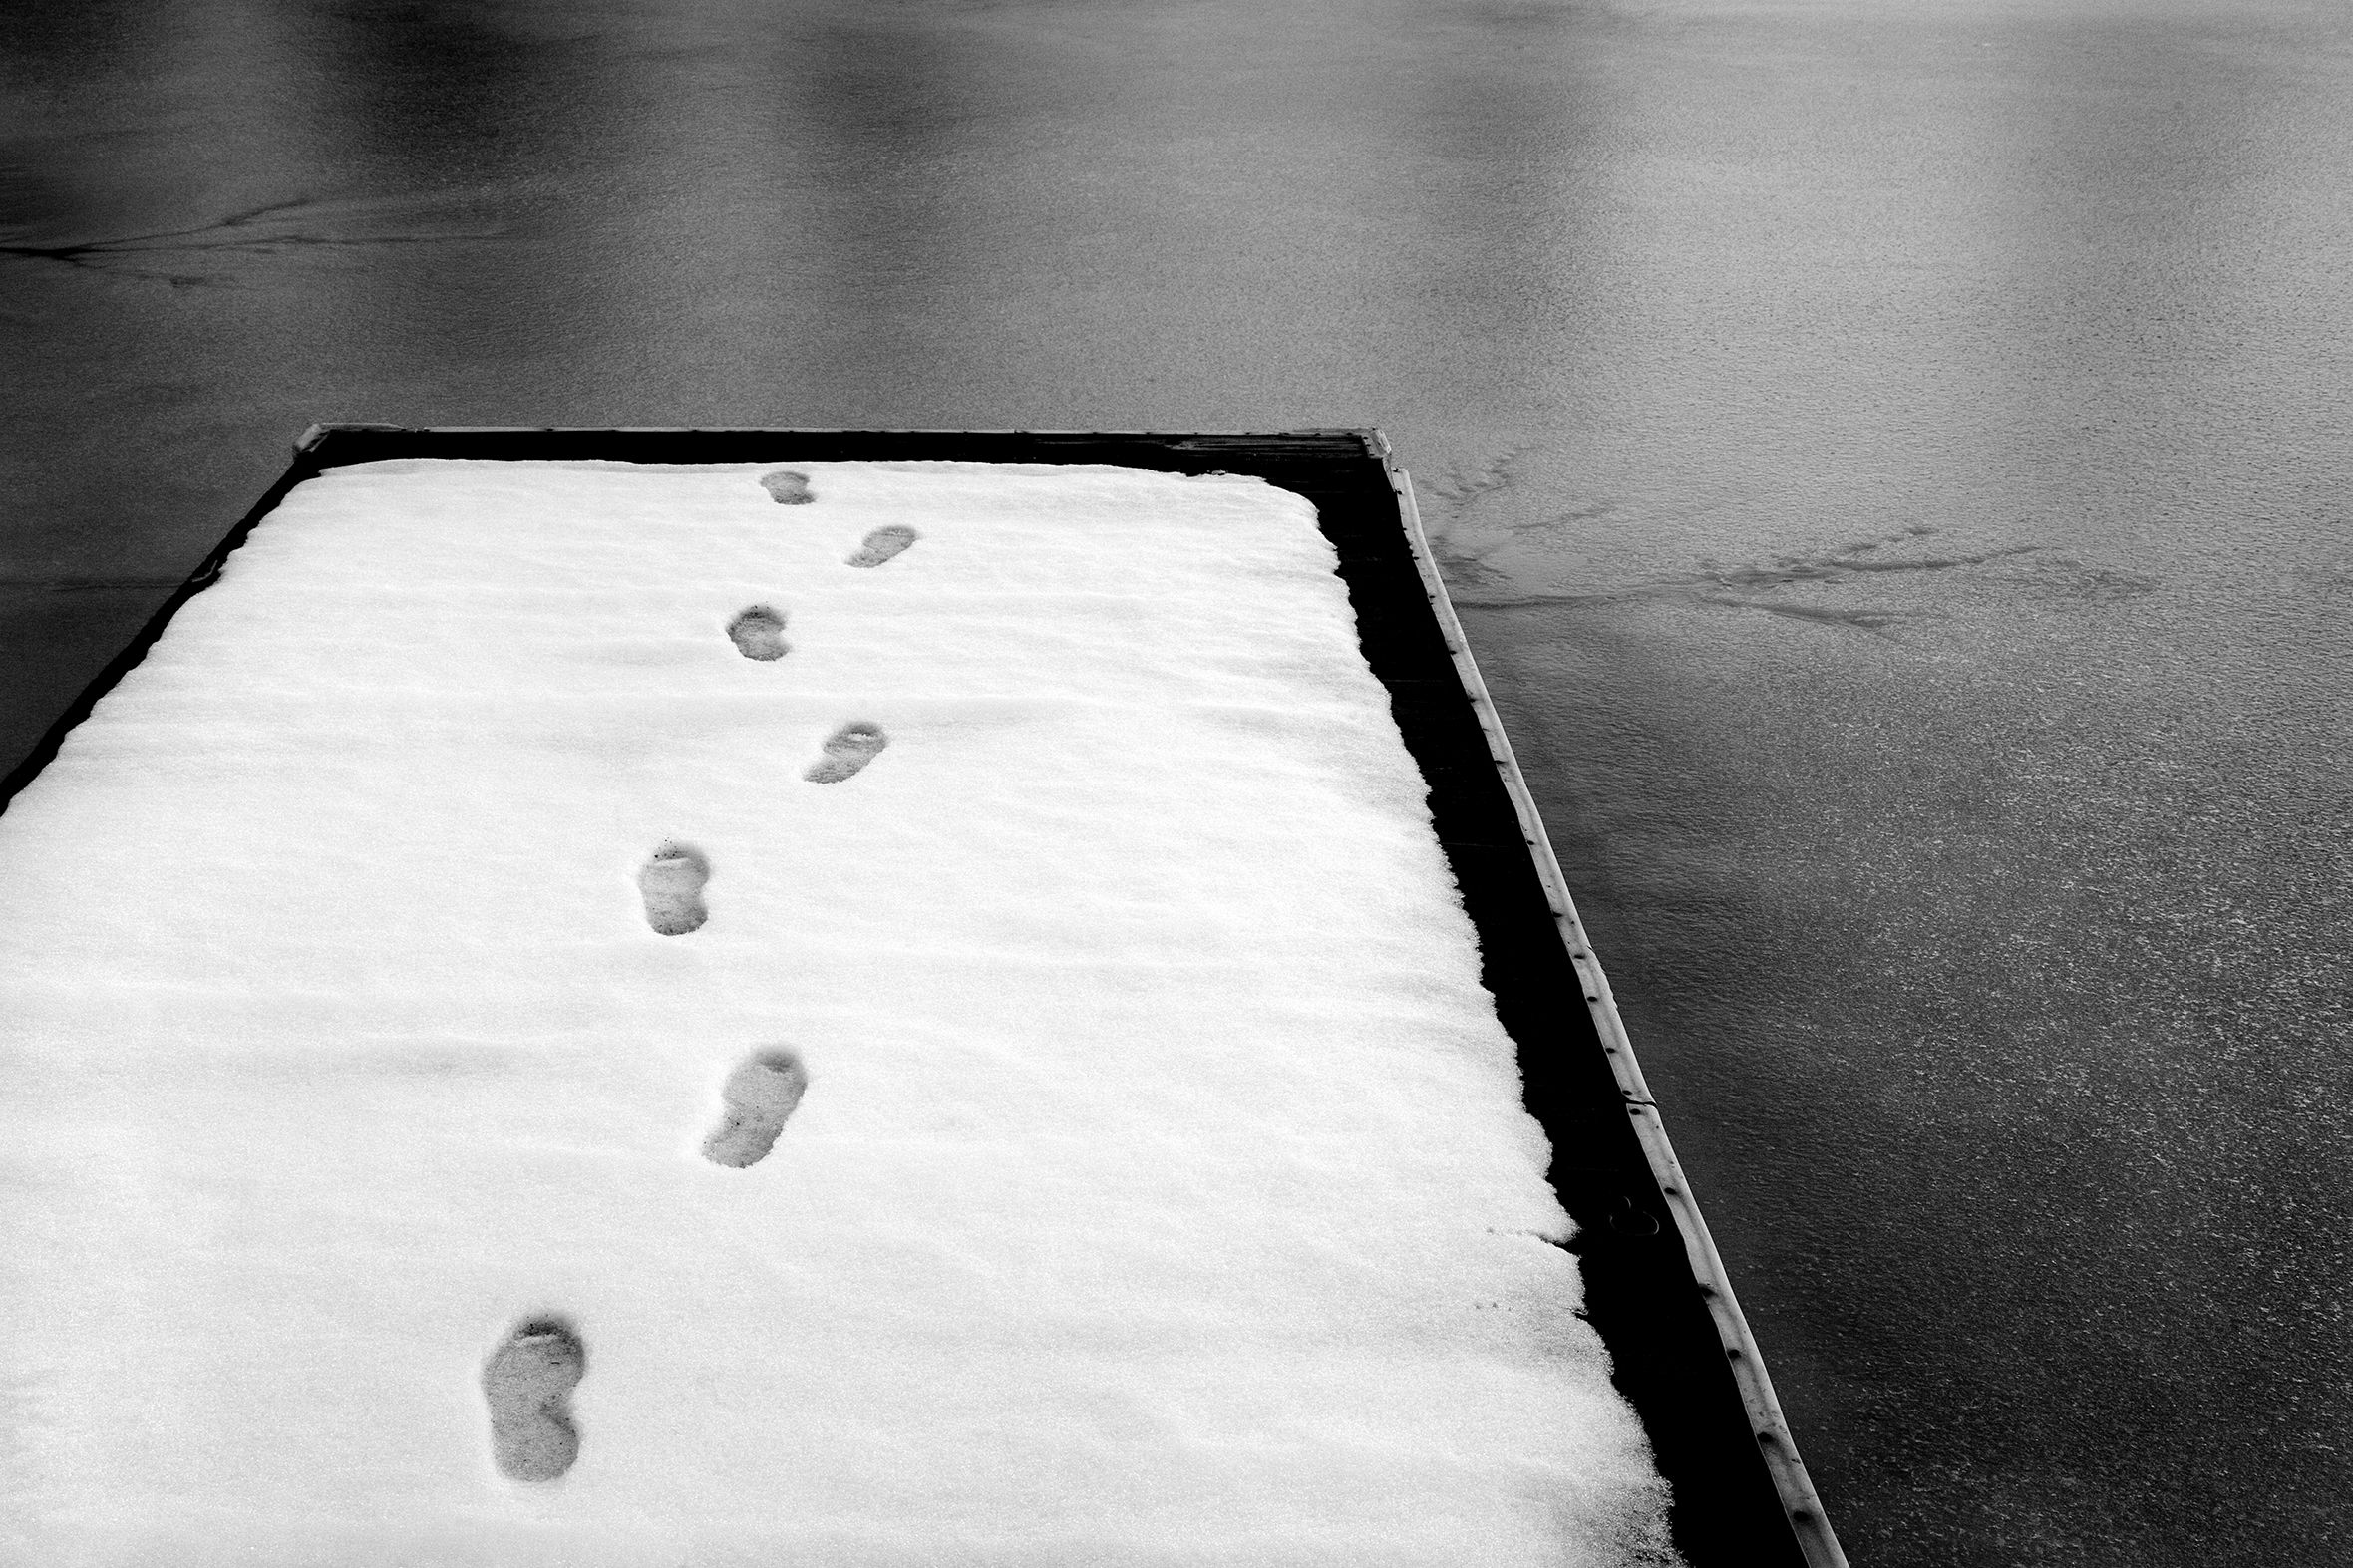 A small, snow-covered pier extends above frozen water. In the snow is one person’s footprints that walk the length of the pier and seemingly off the edge as the snow is otherwise undisturbed.